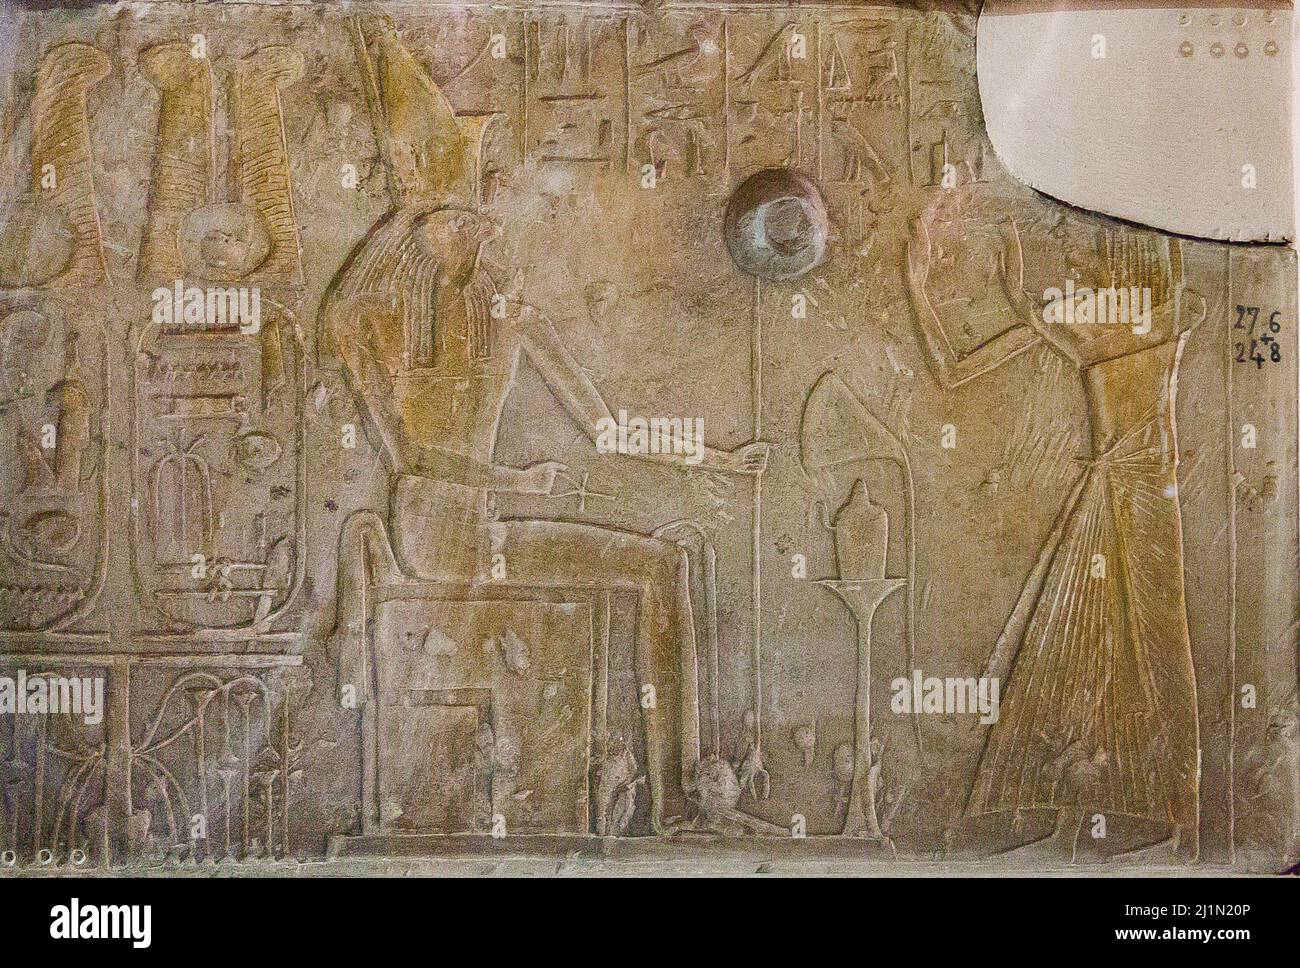 Cairo, Egyptian Museum, worshipping Harendotes, Horus protector of his father. With cartouches of Ramses II. Stock Photo